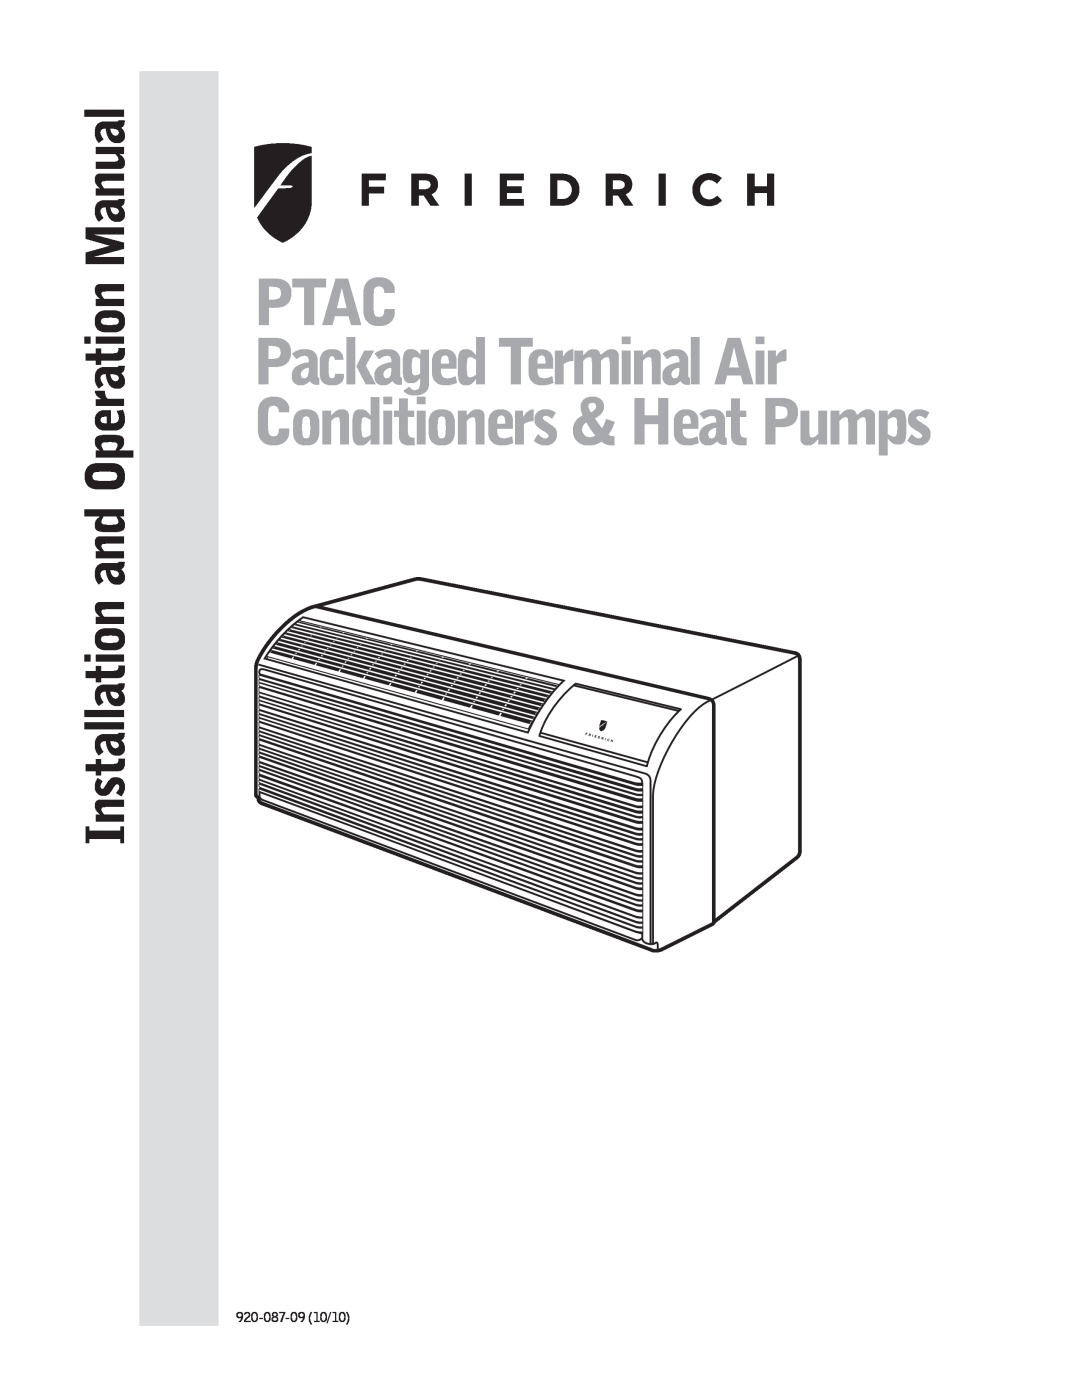 Friedrich 920-087-09 operation manual PTAC Packaged Terminal Air, Conditioners & Heat Pumps 